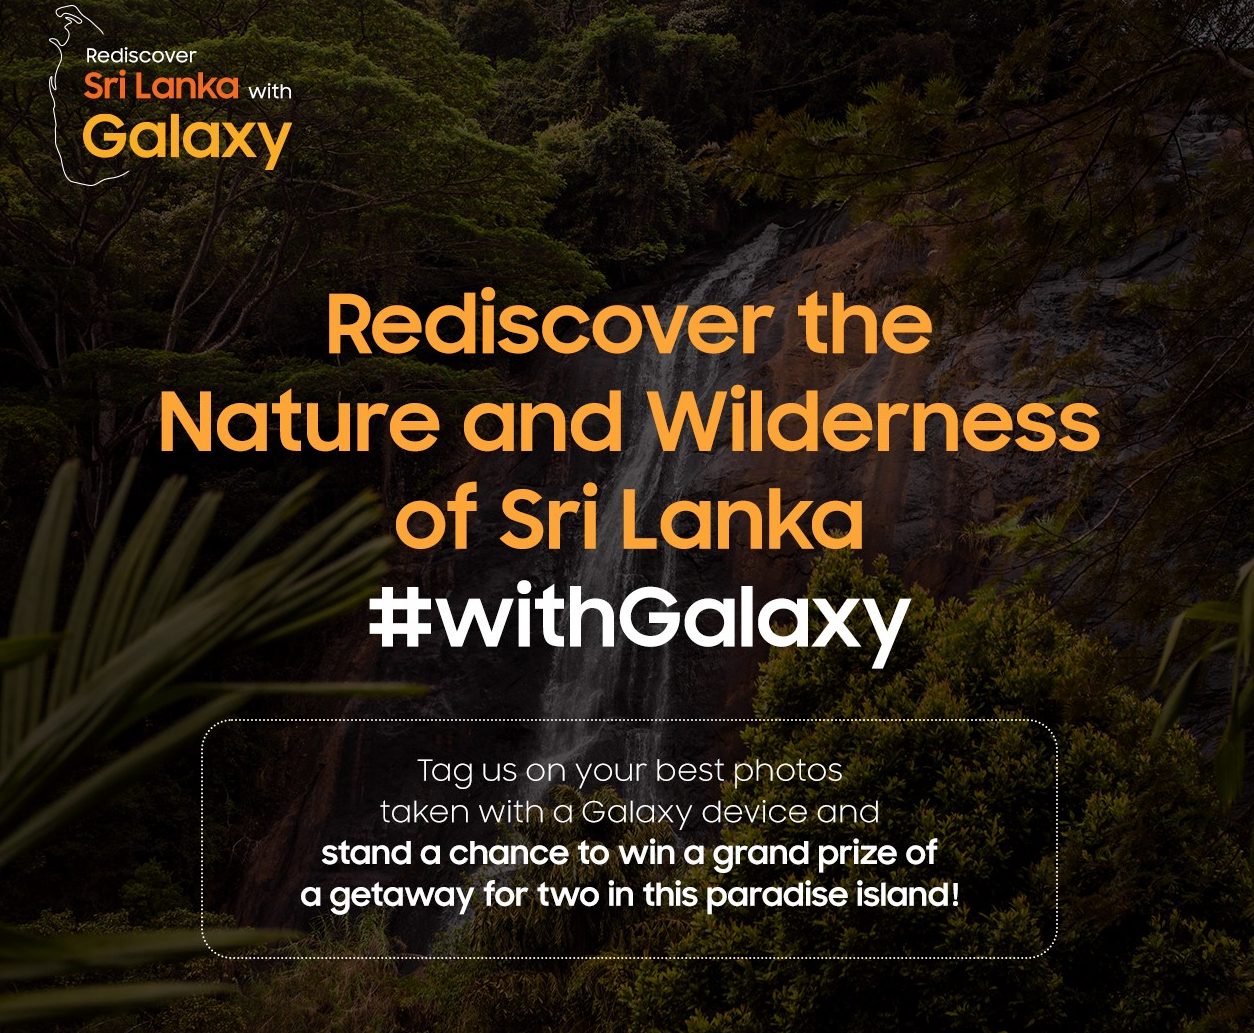 Samsung launches “Rediscover Sri Lanka” Photography Competition for Galaxy Users - Adaderana Biz English